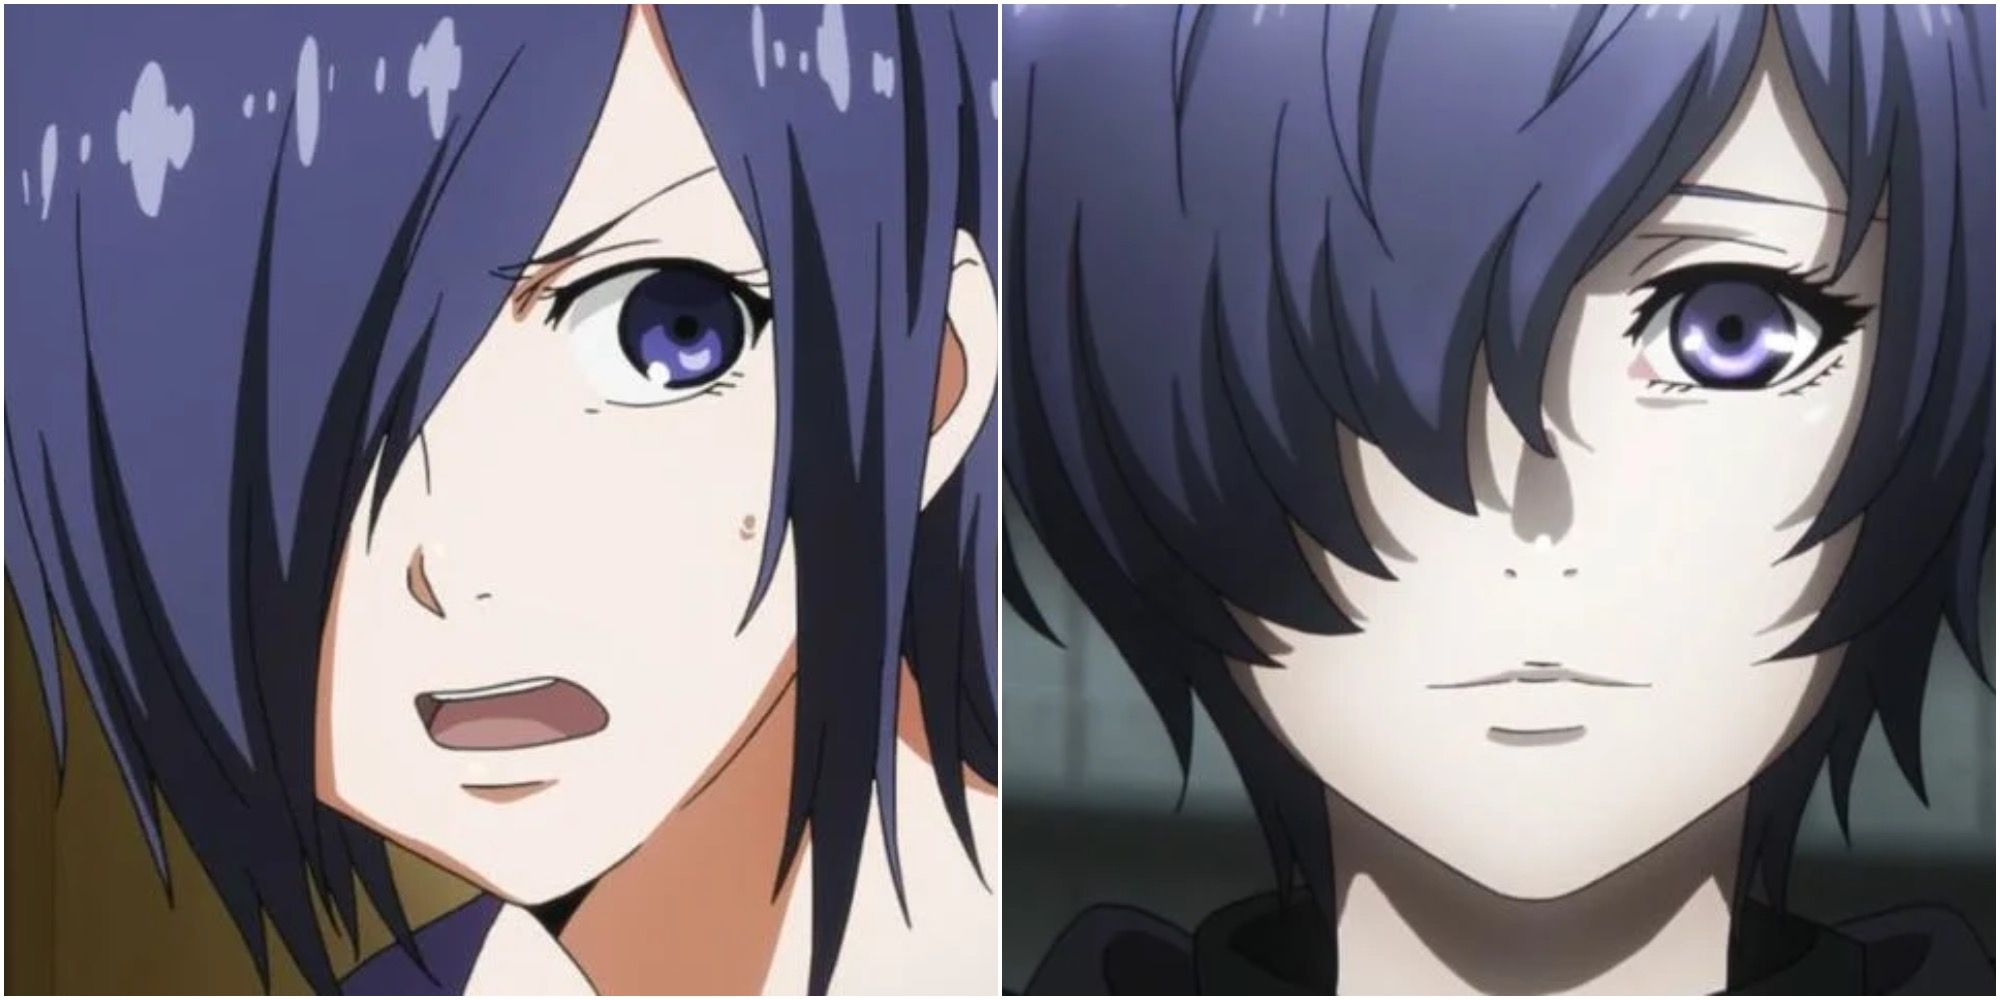 Collage of Touka from Tokyo Ghoul